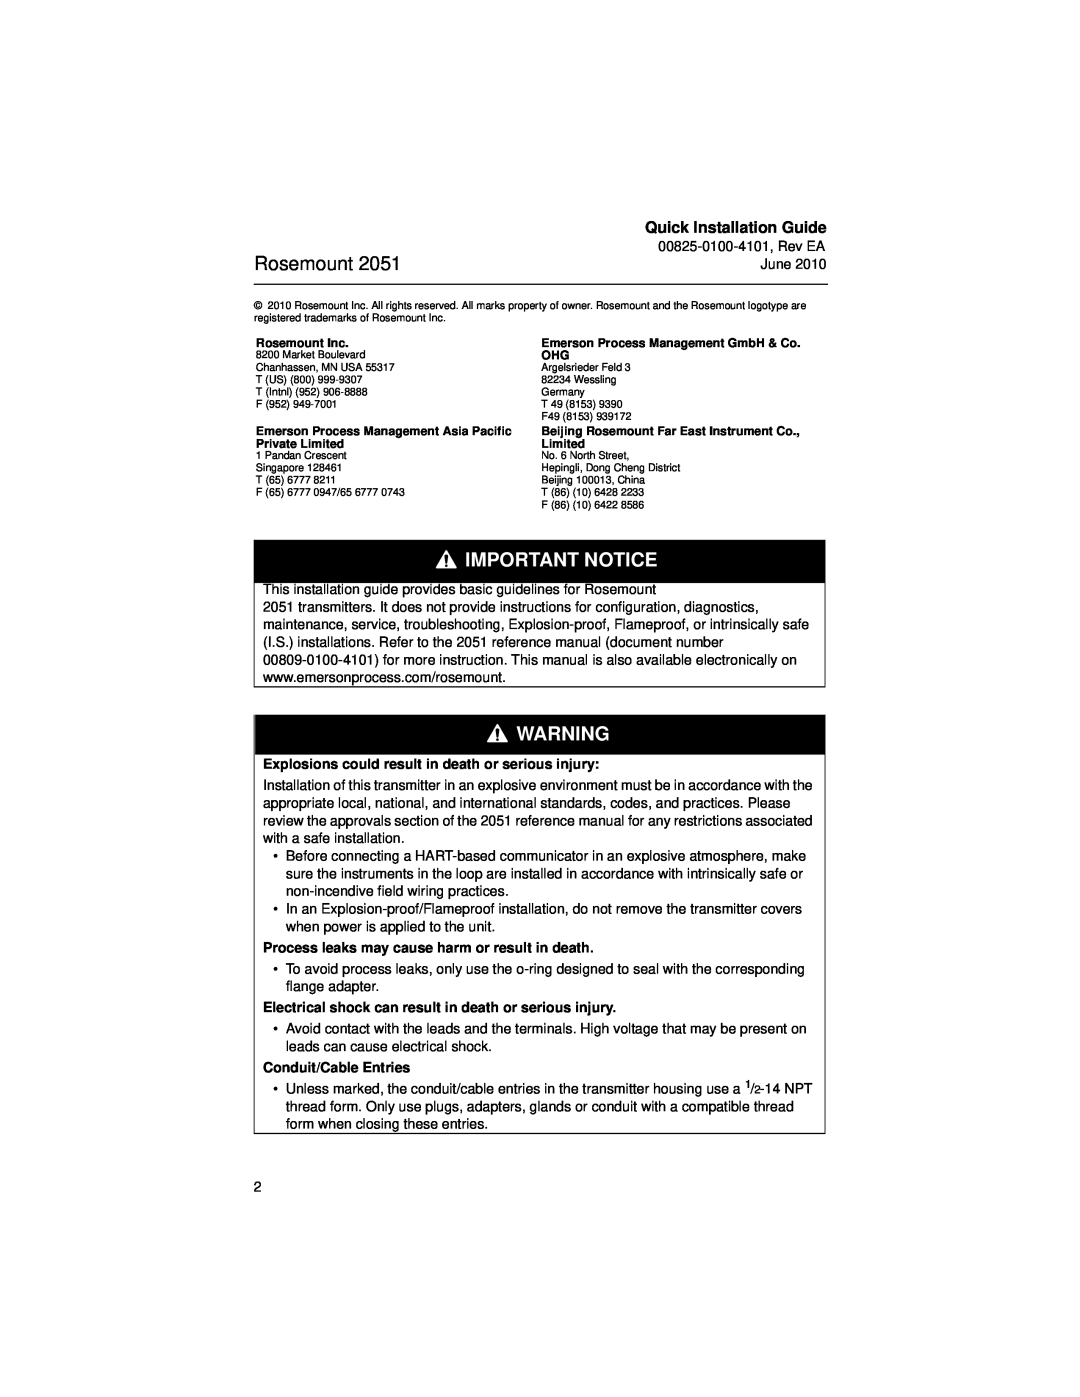 Emerson Process Management 2051CF manual Rosemount, Important Notice, Quick Installation Guide, Conduit/Cable Entries 